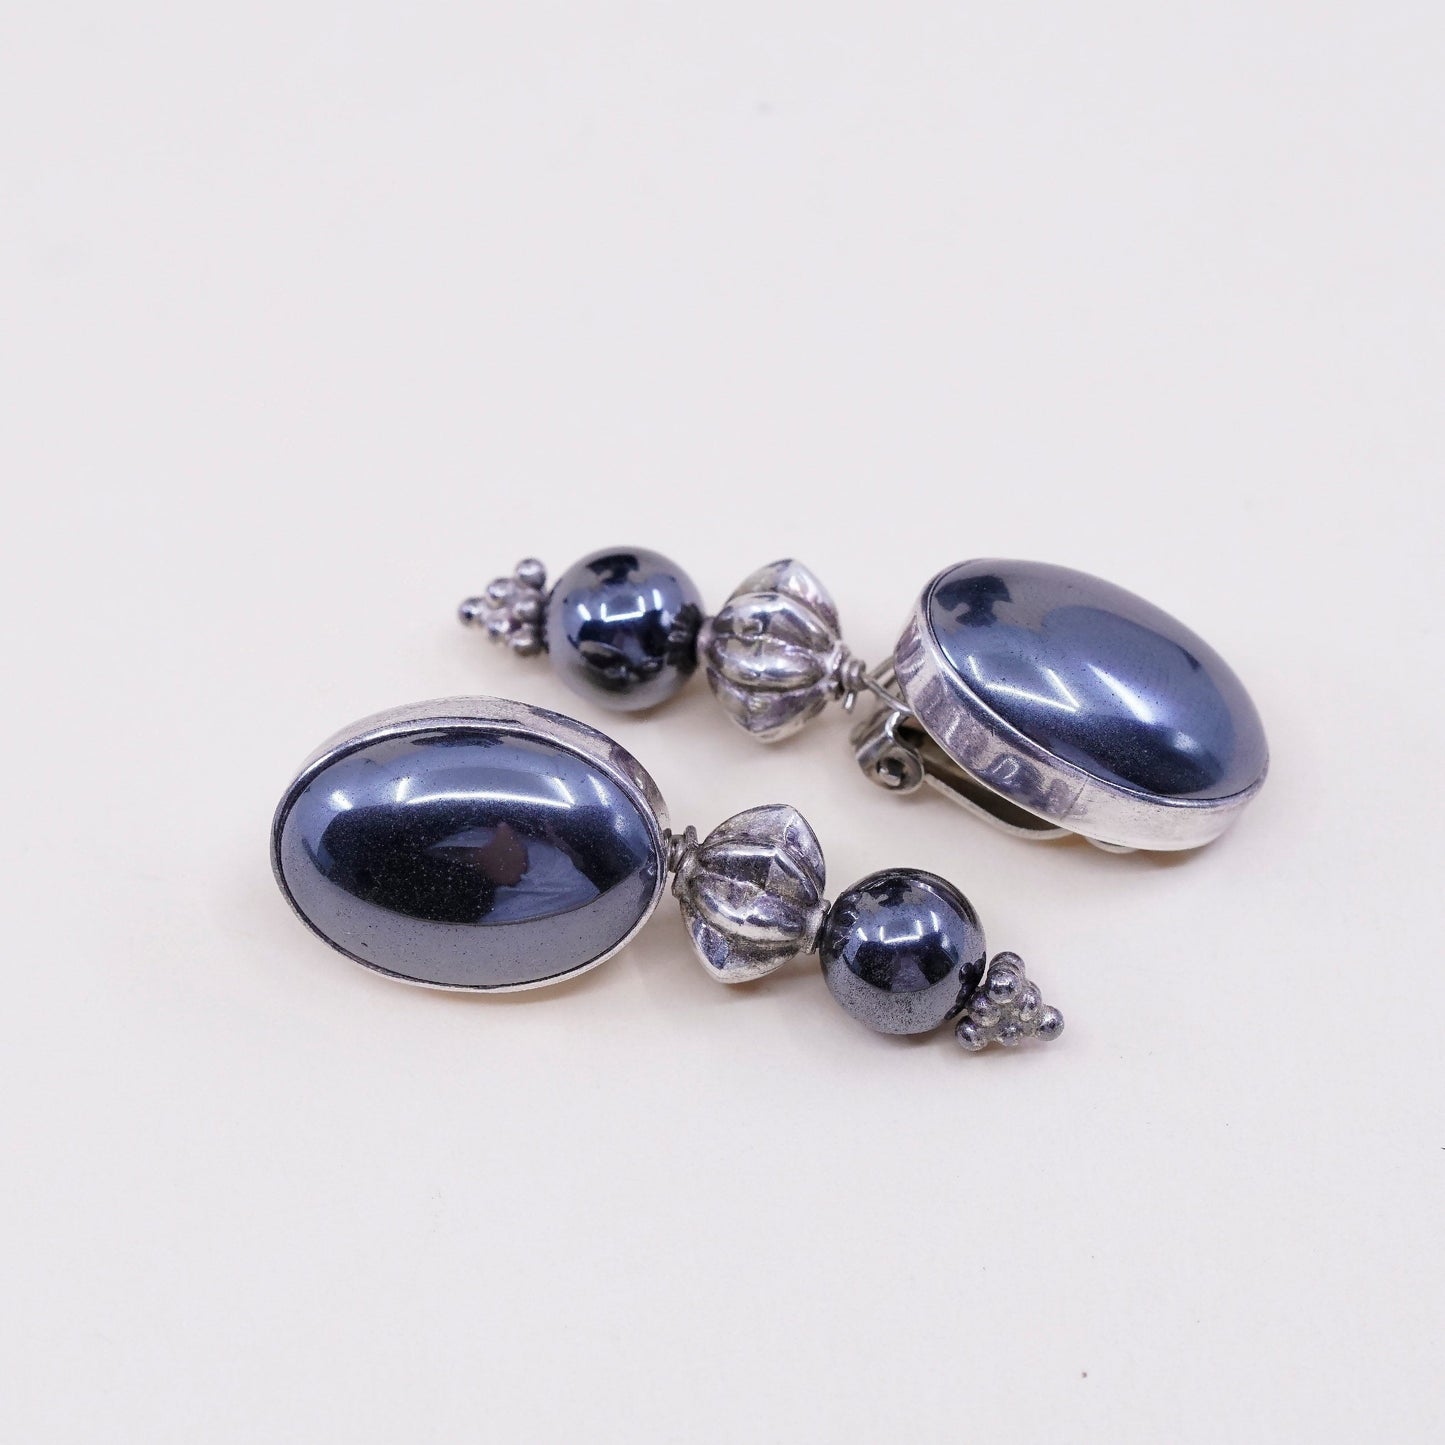 Vintage AIS 925 Sterling silver clip on earrings with hematite stone